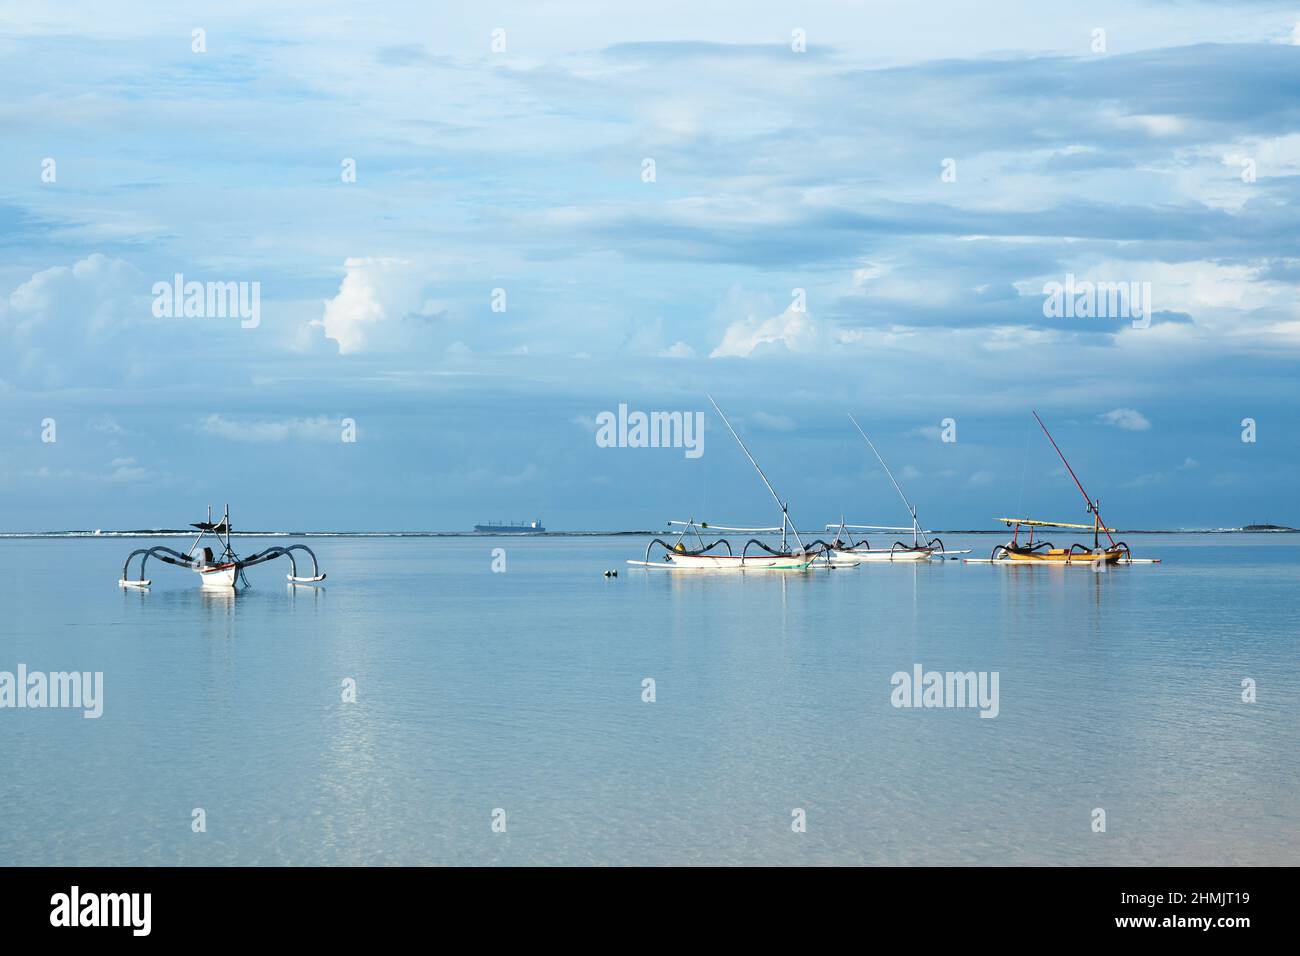 Fishing boats floating on the ocean. Wooden boat sailing in open waters. Sailing boat landscape. Tropical scenery. Bali island, Indonesia. Summer vaca Stock Photo